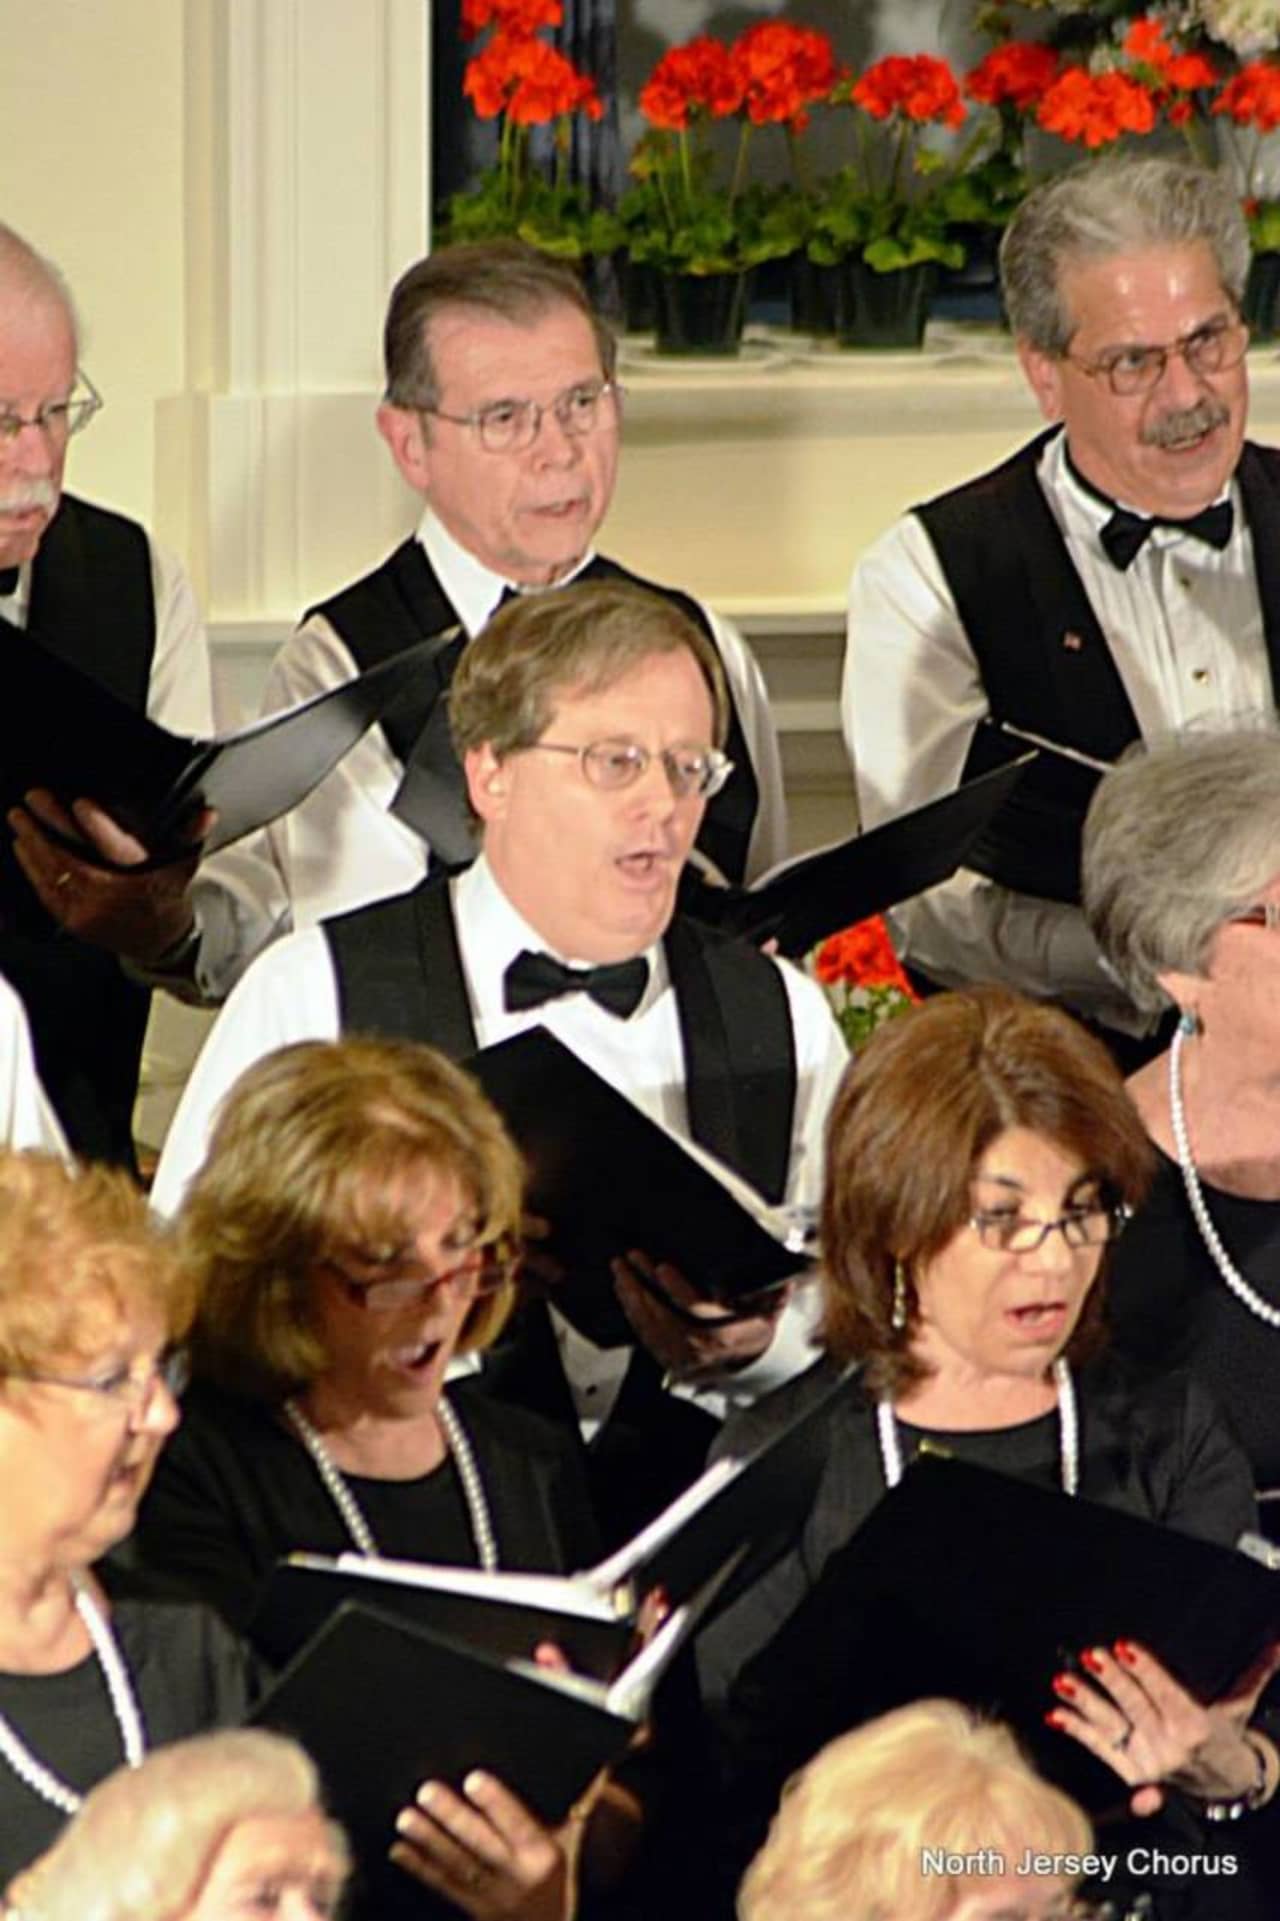 The North Jersey Chorus' holiday performance will benefit a music scholarship fund.